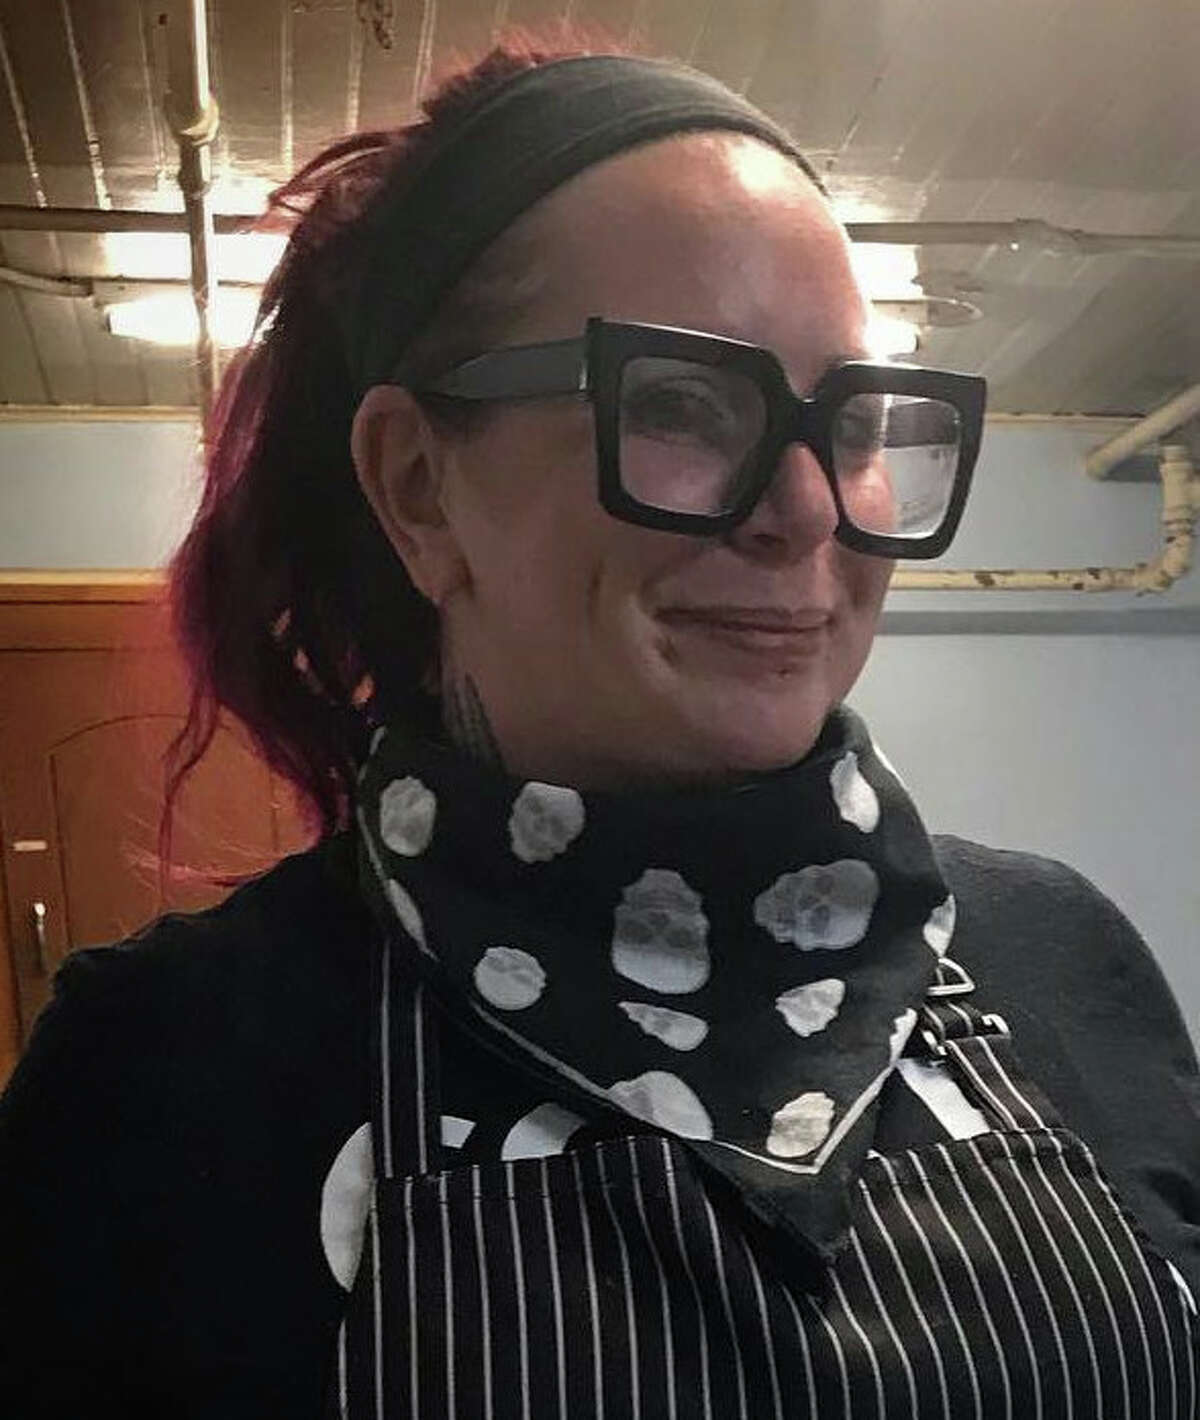 Shannon Dowen-Ronda owns Nyx bakery in Albany and is the executive chef of the Feed Albany charity.